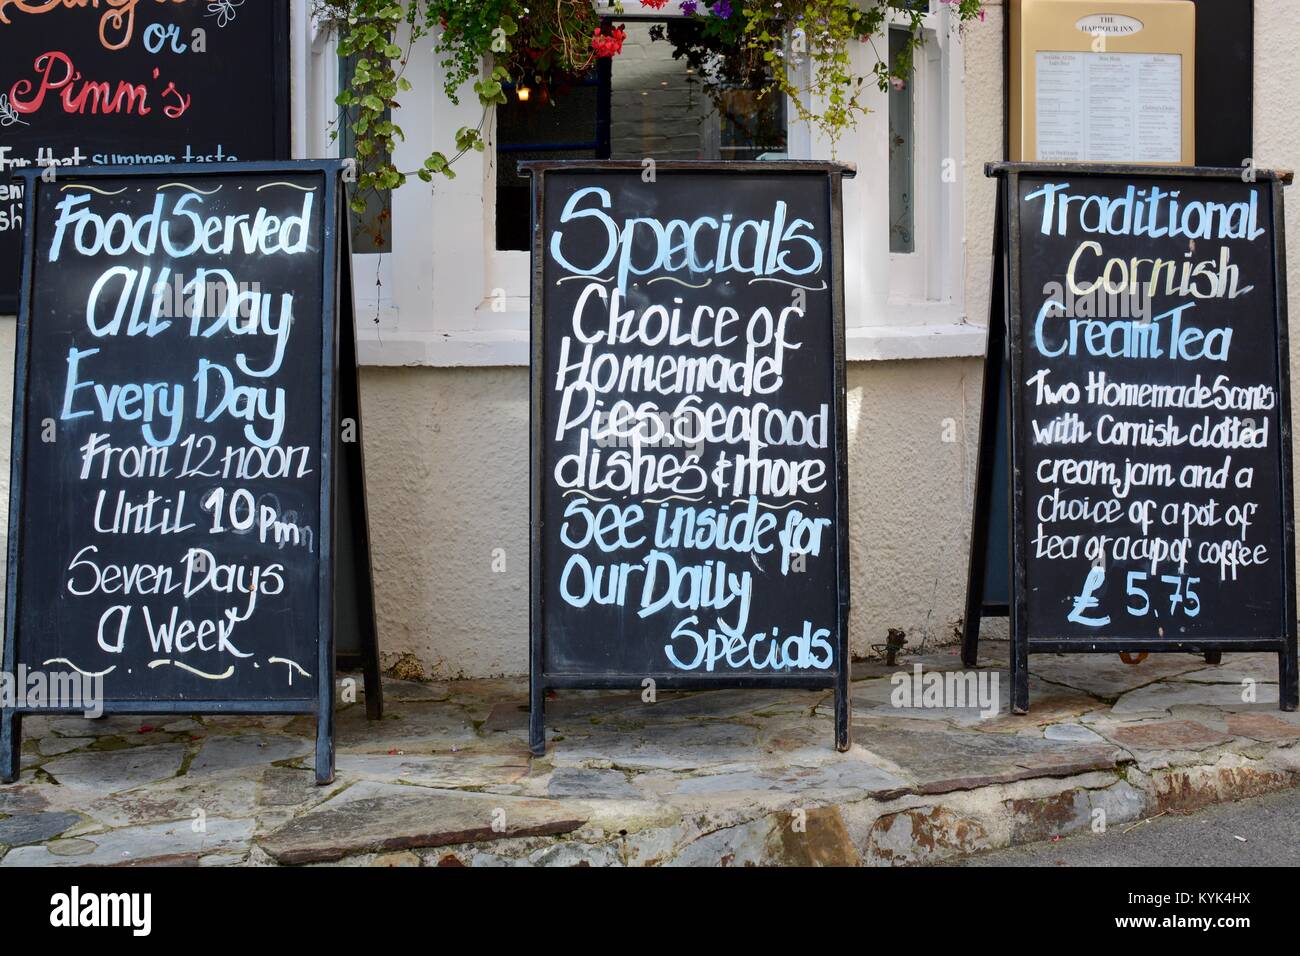 Food and menu signs outside The Harbour Inn pub in Padstow, Cornwall, UK Stock Photo